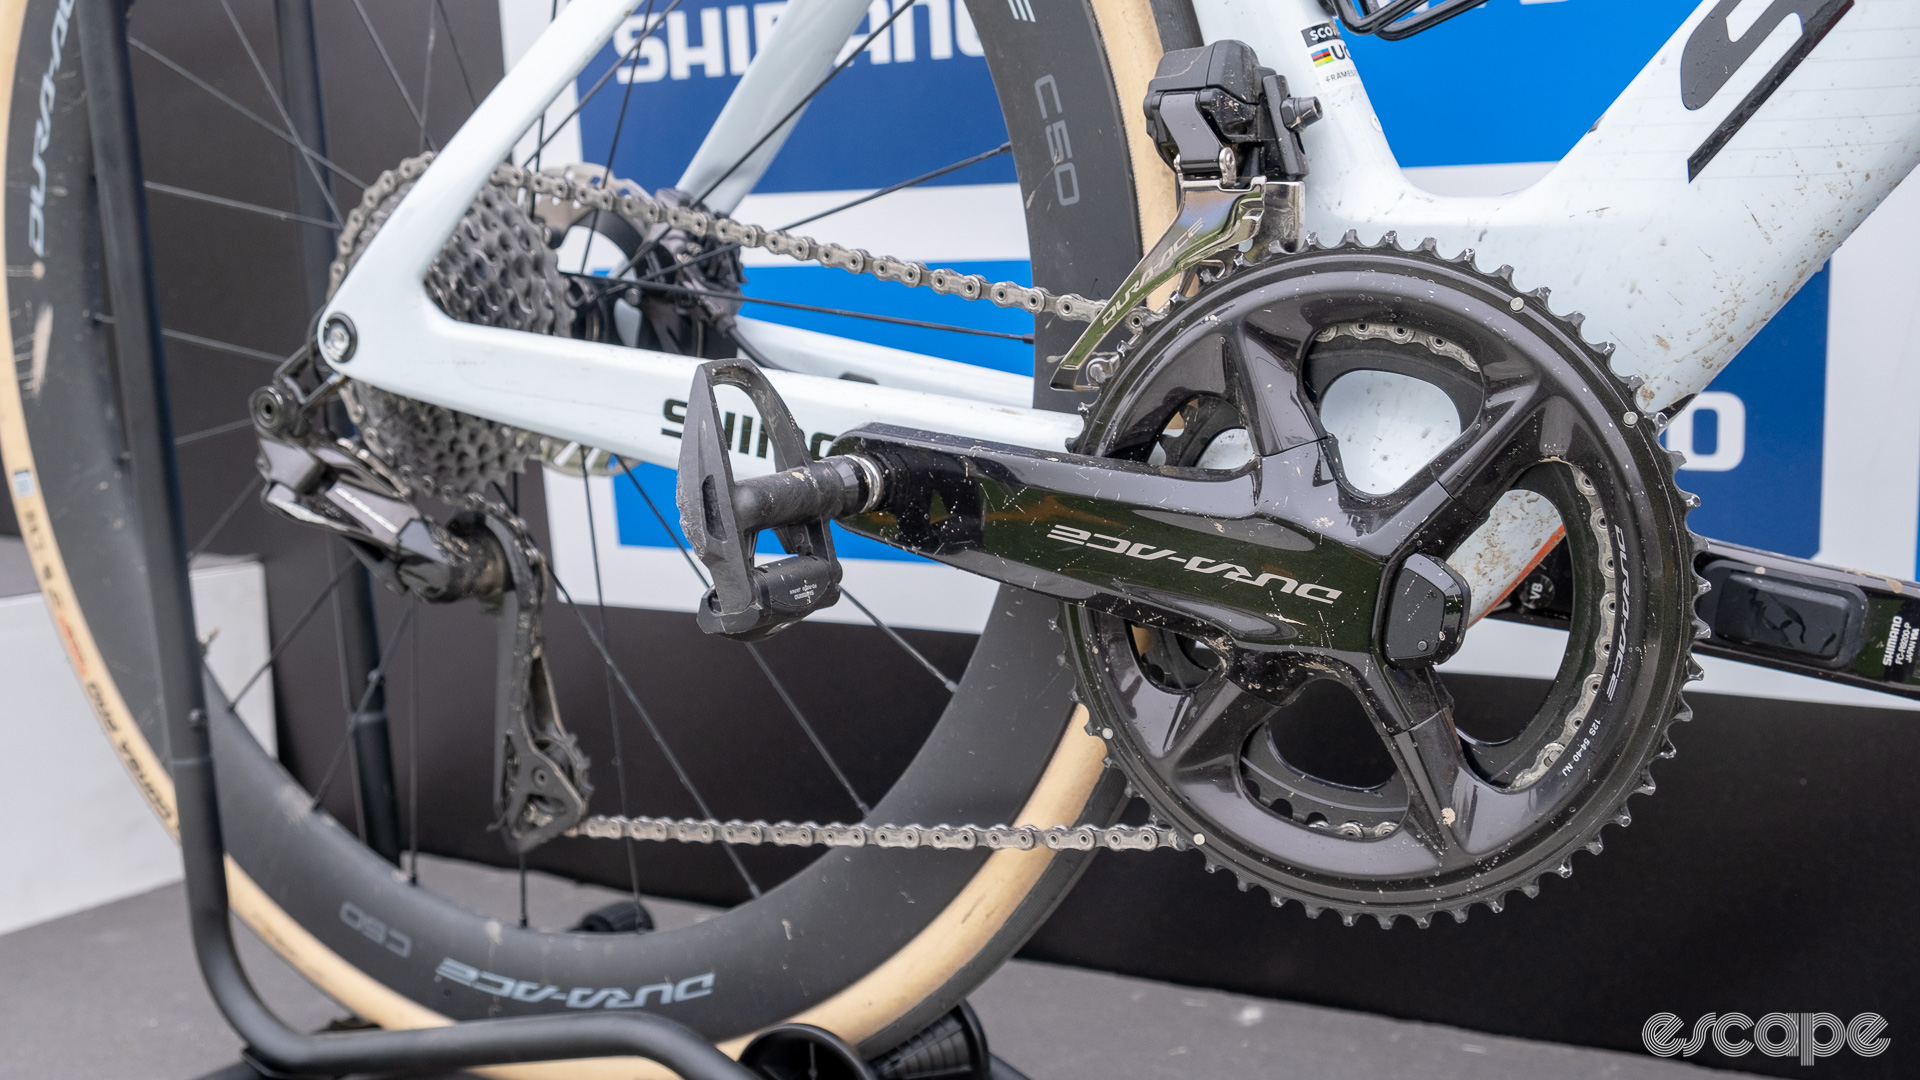 The image shows a dura ace power meter.